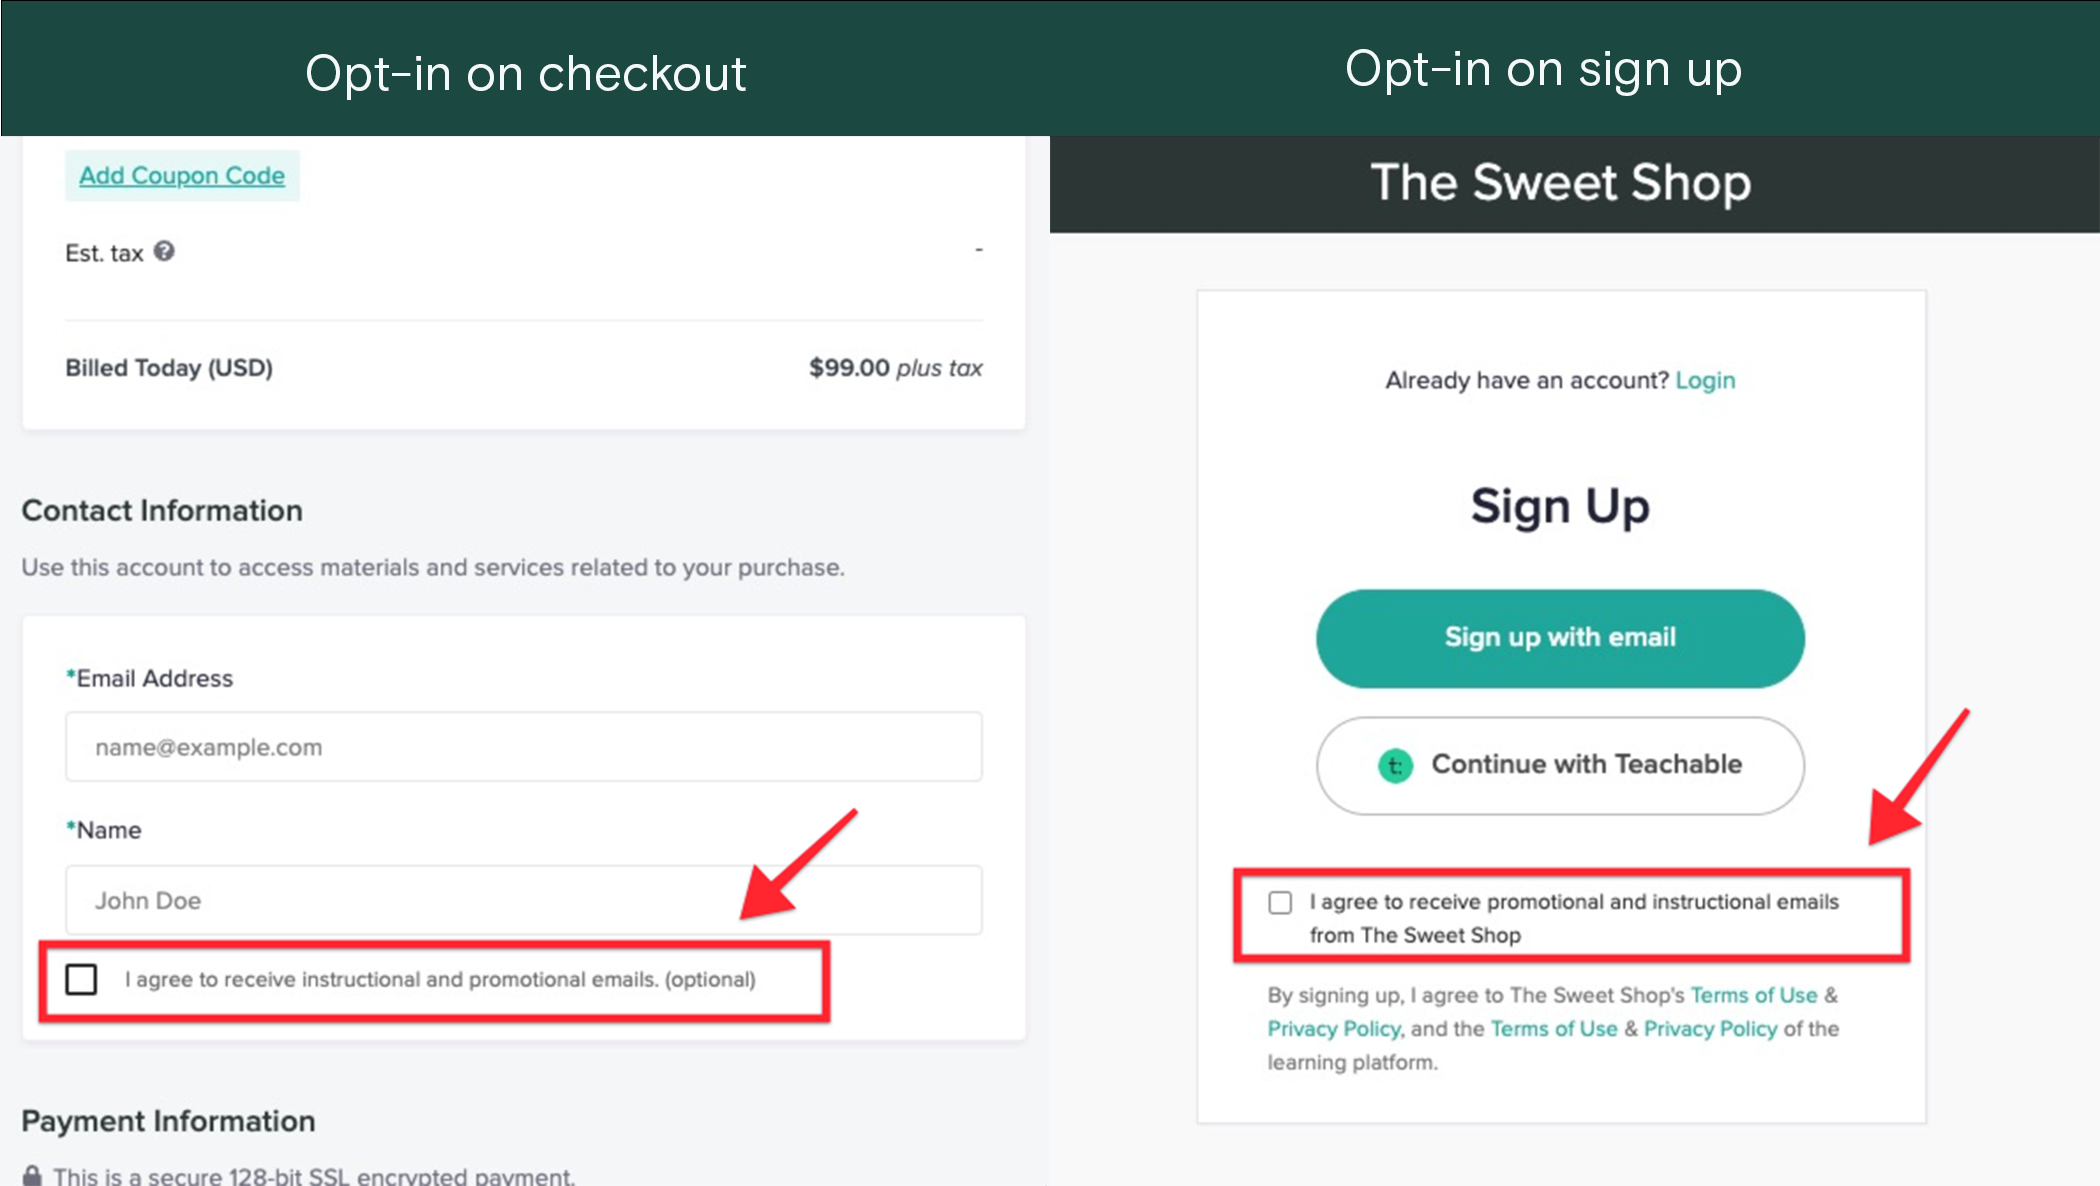 A side by side graphic that shows the checkbox where users opt in to receiving emails on both the checkout page and school sign up page.